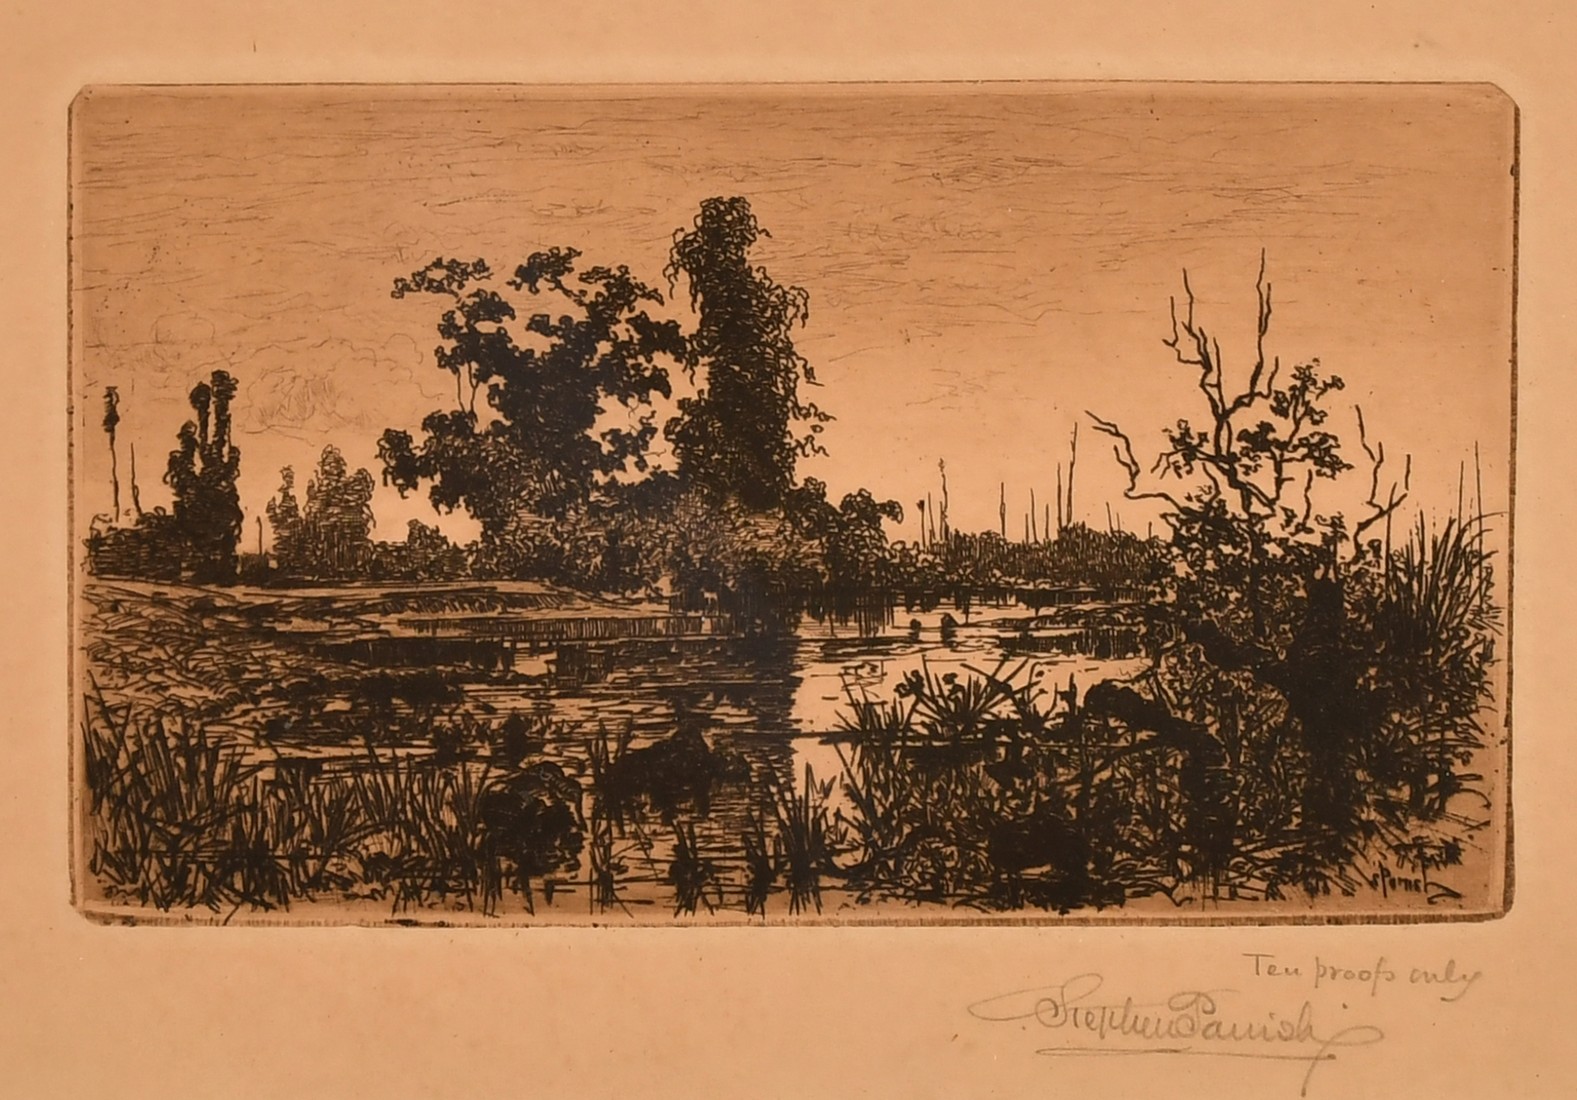 Stephen Parrish, a river landscape, etching, signed in pencil and inscribed 'Ten Proofs Only',